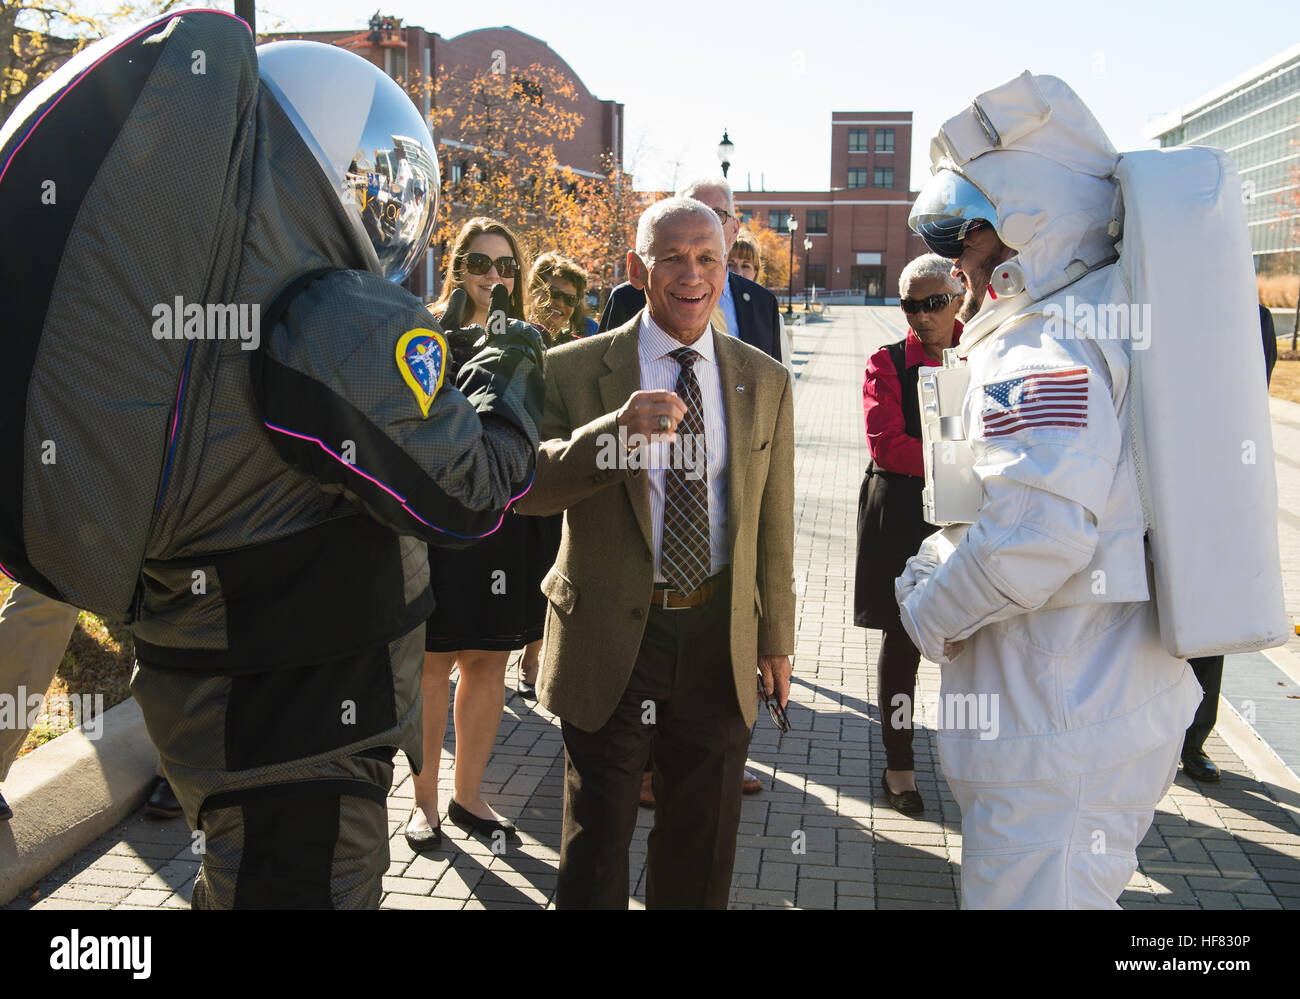 NASA Administrator Charles Bolden speaks with NASA staff in space suits at the Langley Research Center's Centennial float on Thursday, Dec. 1, 2016, at Langley Research Center in Hampton, VA.  While in Hampton, Administrator Bolden also participated in several events highlighting NASA's &quot;human computers&quot; featured in the film &quot;Hidden Figures&quot;. The film stars Taraji P. Henson as Katherine Johnson, the African American mathematician, physicist, and space scientist, who calculated flight trajectories for John Glenn's first orbital flight in 1962. Aubrey Gemignani) Stock Photo